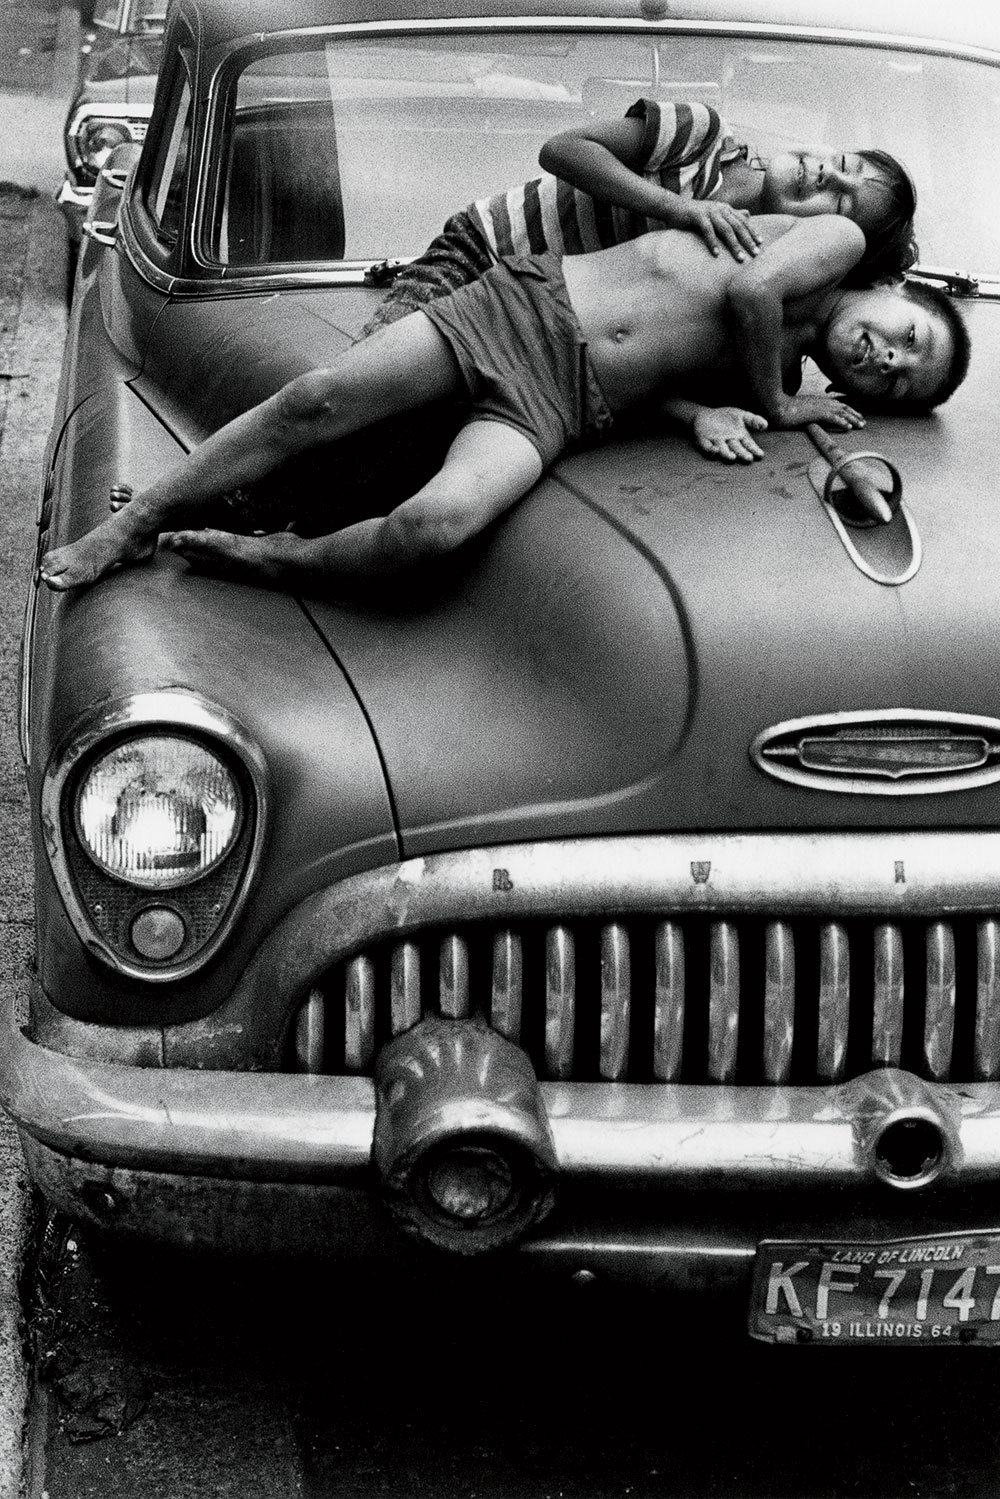 A 1964 photo of two kids lying on the hood of a car in Uptown.